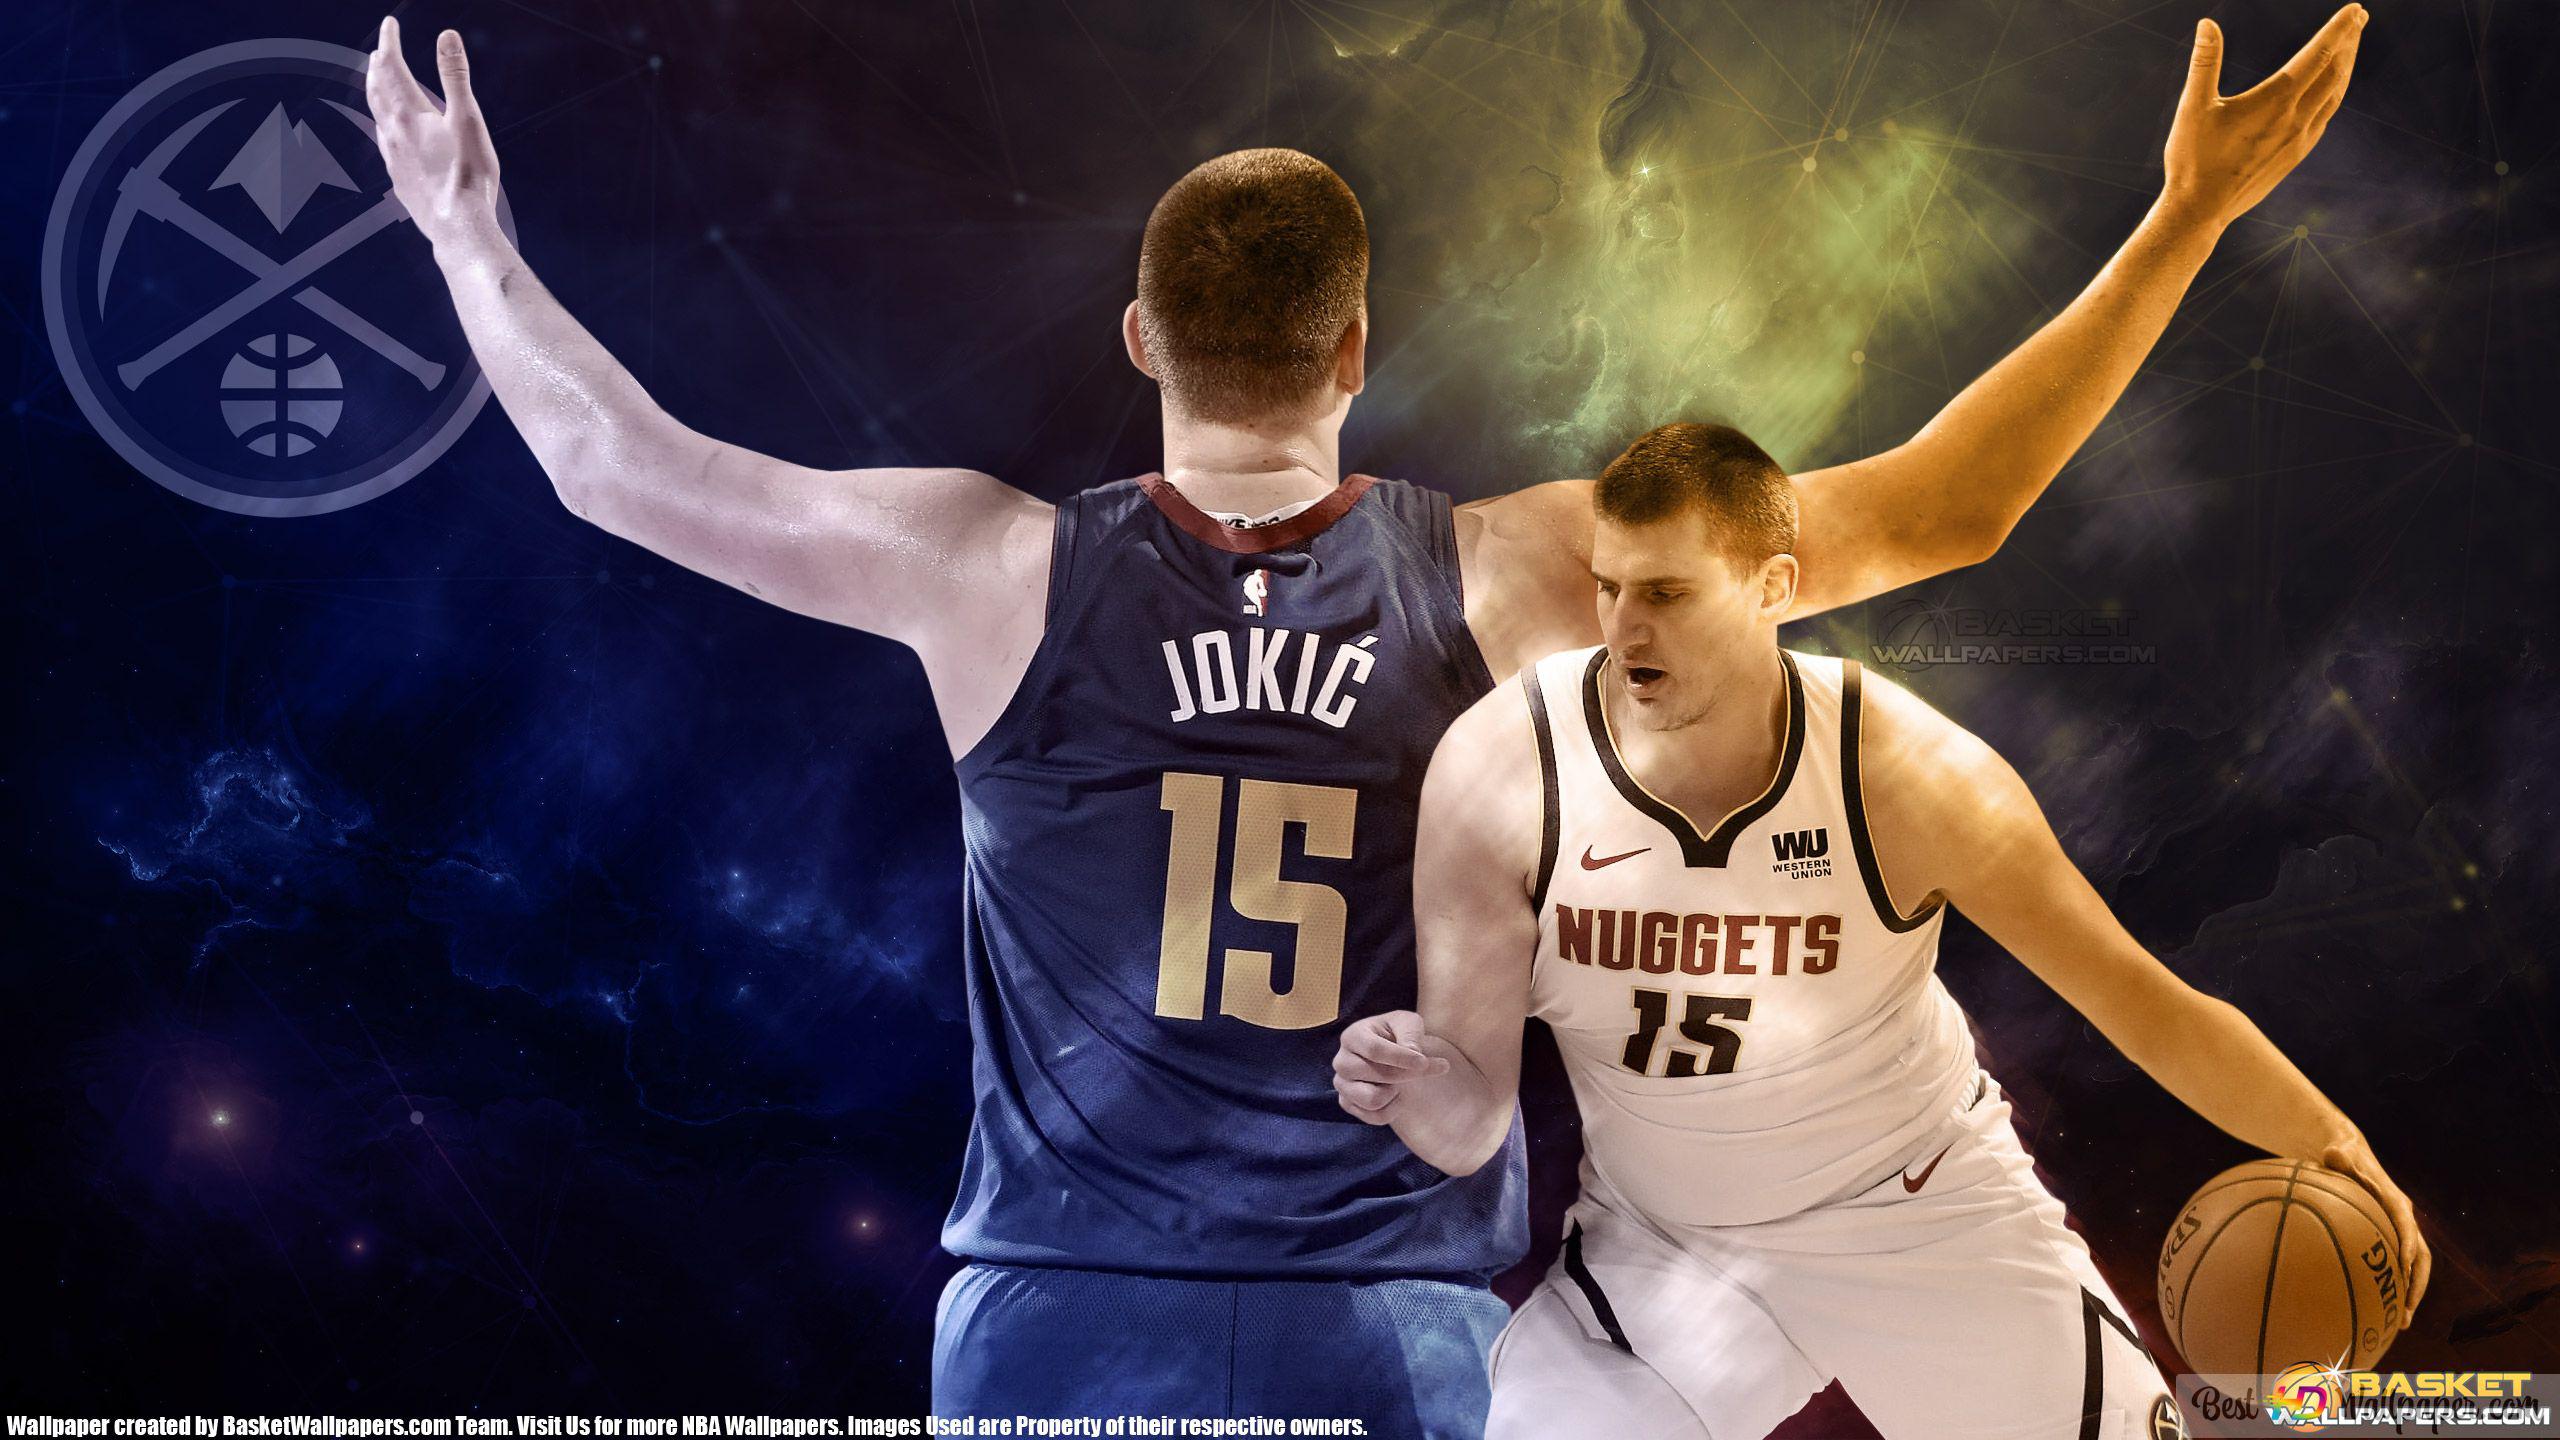 Nikola jokić with his hands up and dribbling a basketball HD wallpaper download